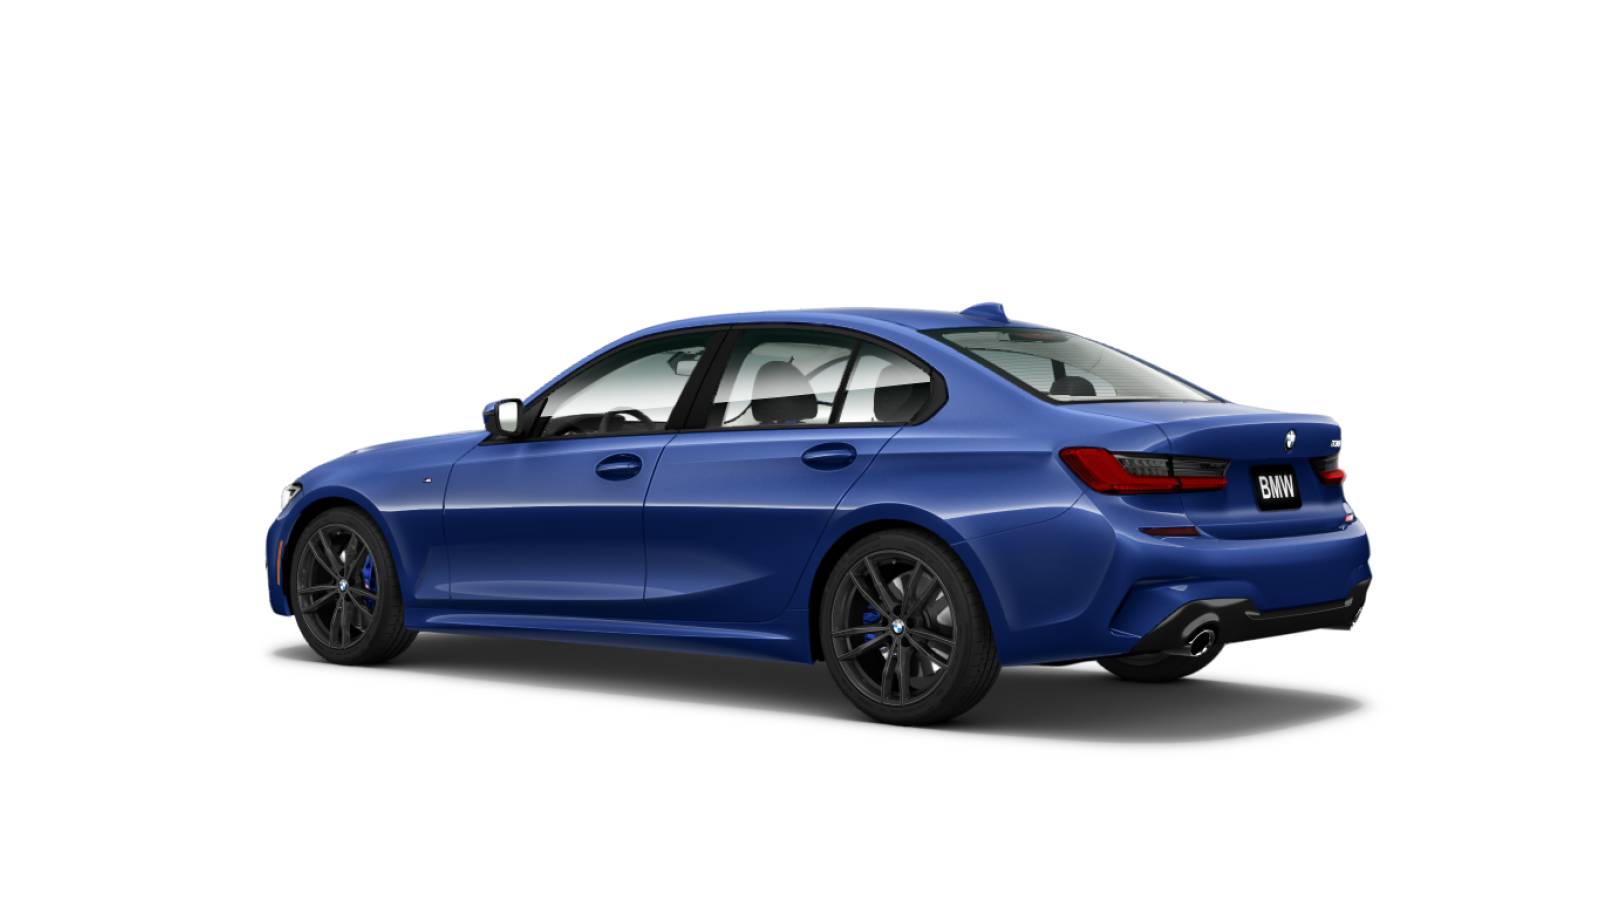 2019 BMW 3 Series G20: This Is It!